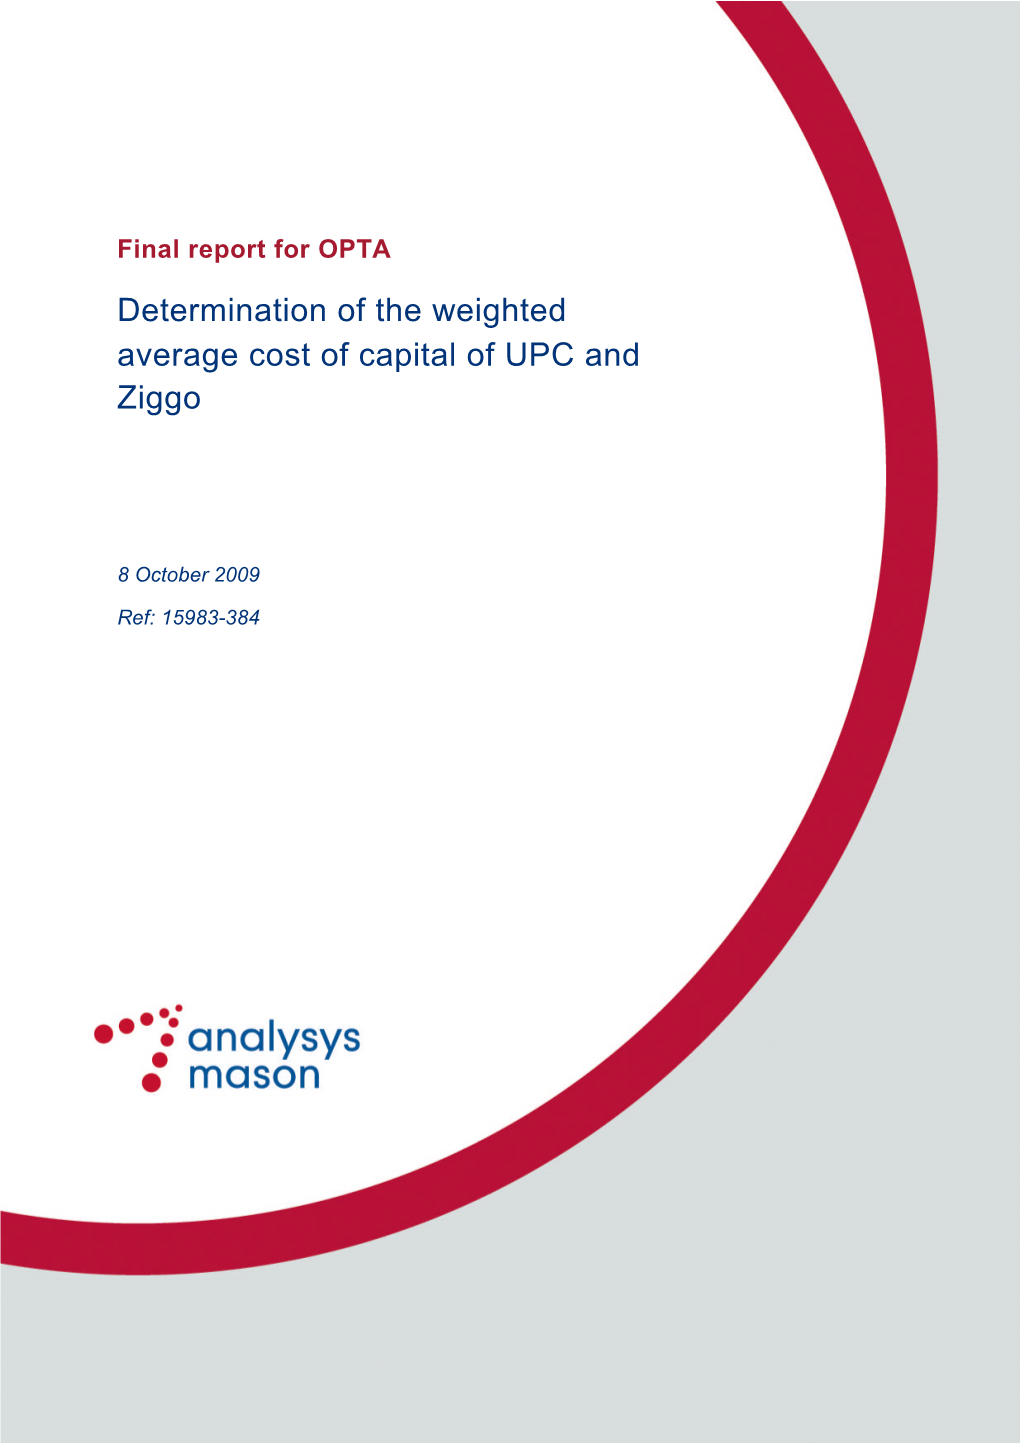 Determination of the Weighted Average Cost of Capital of UPC and Ziggo